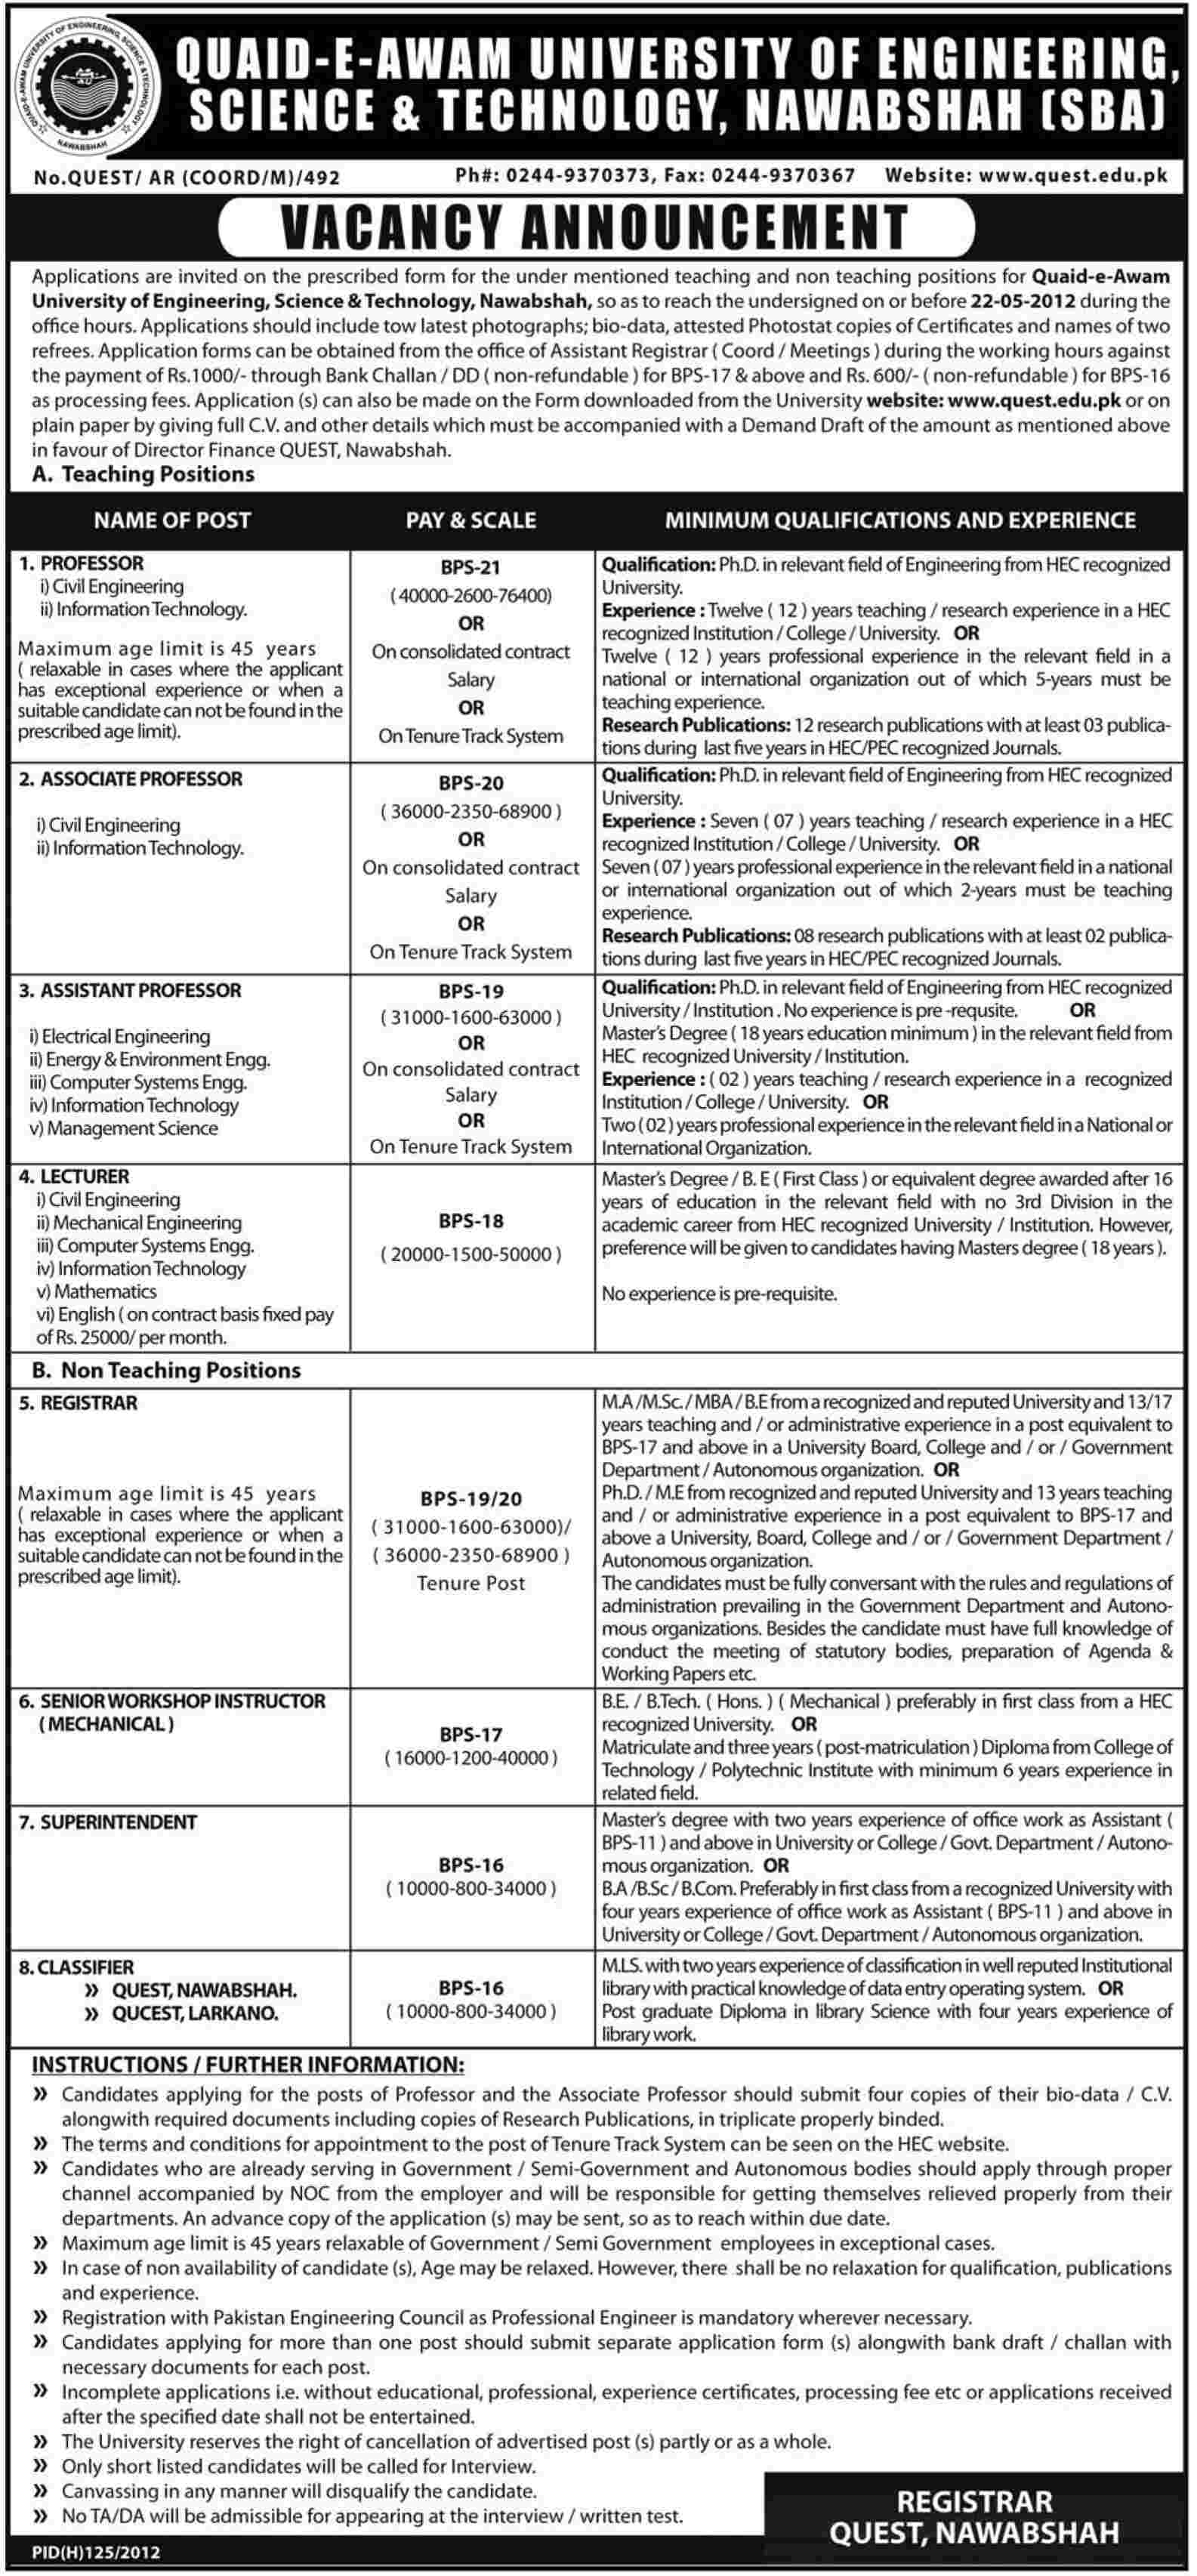 Professors and Non-Teaching Staff required at QUEST (University job)